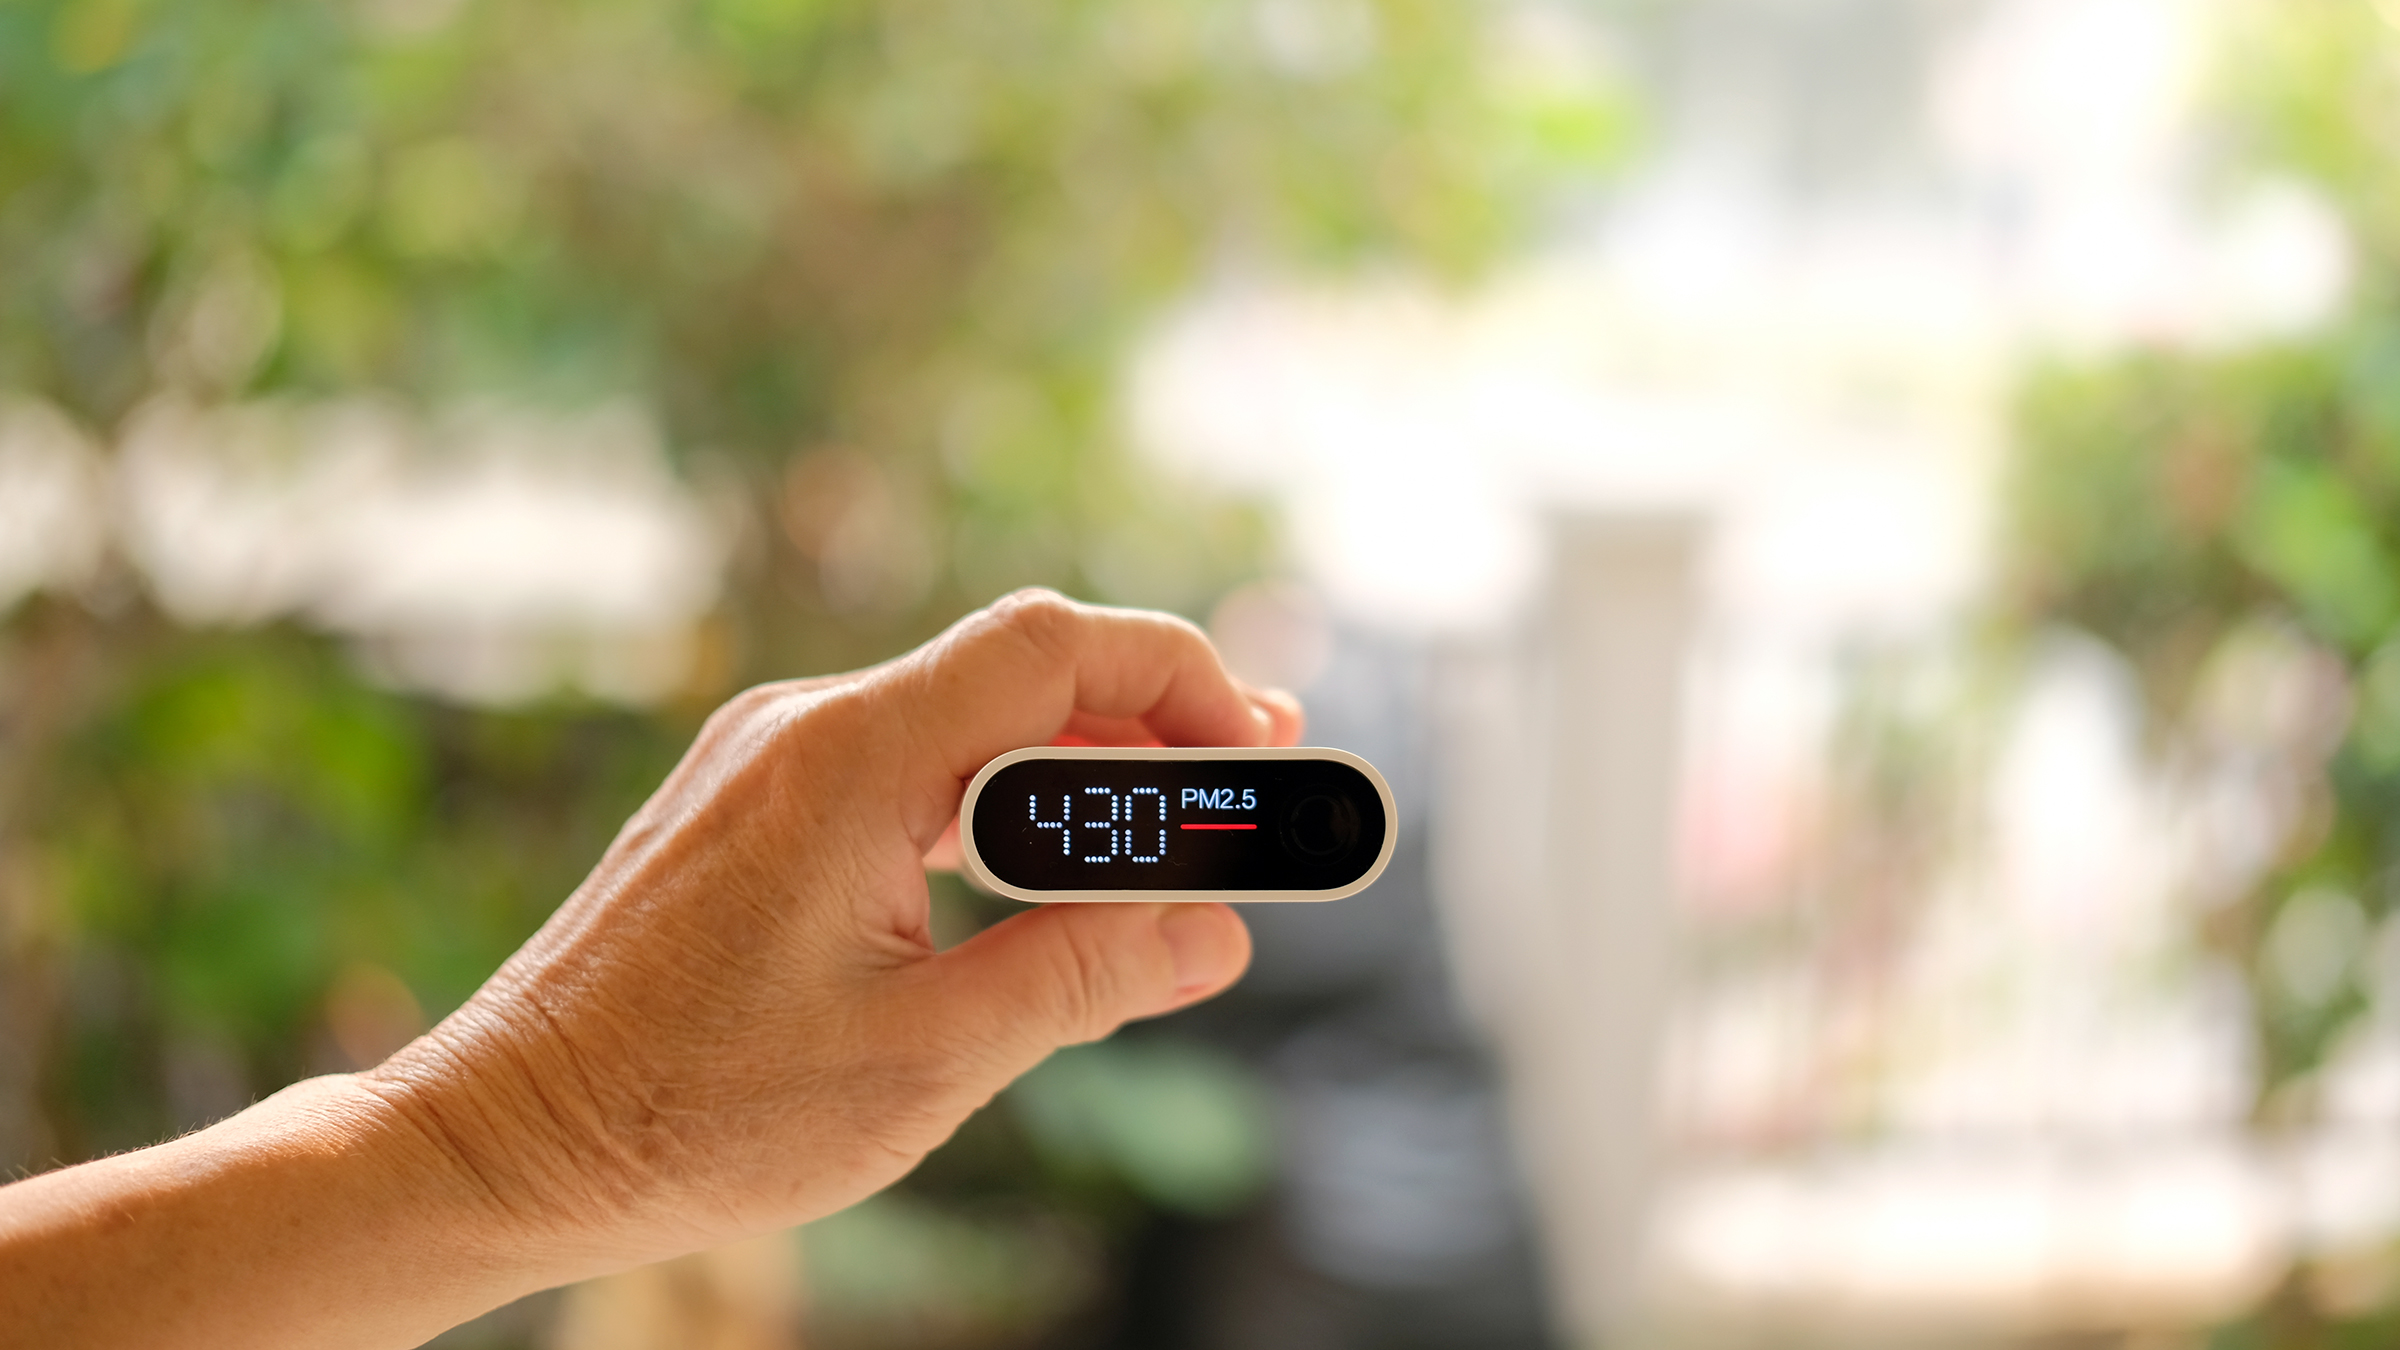 New Launch Smart Home Air Quality Monitor Measure Humidity